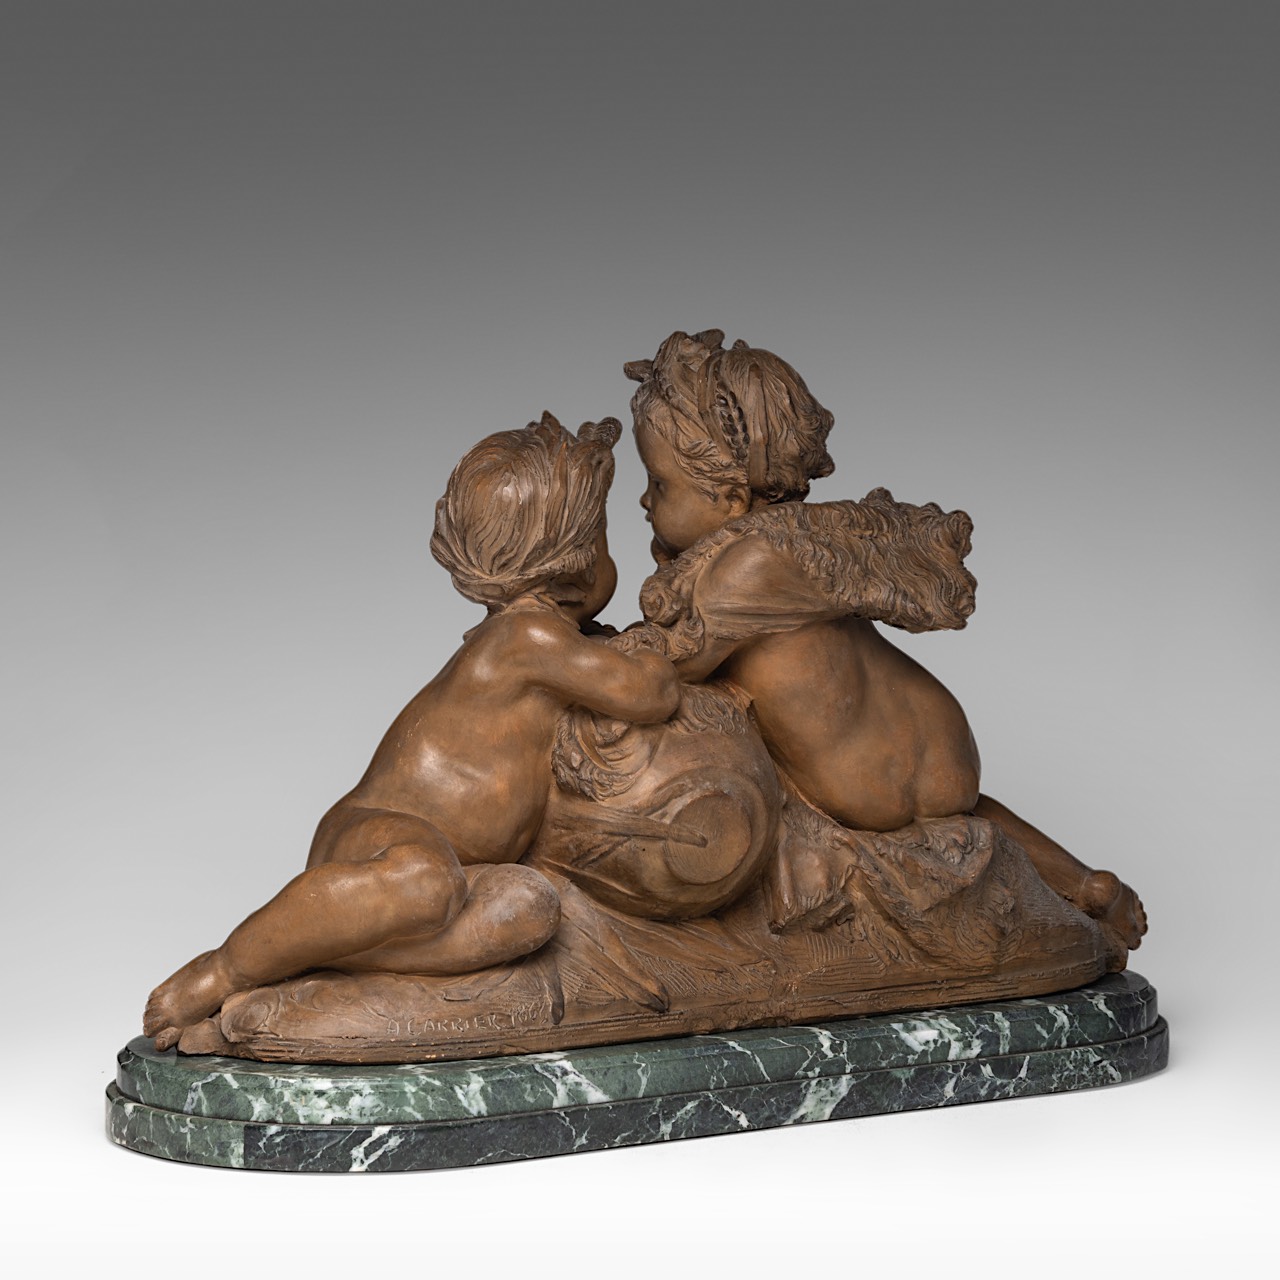 Carrier-Belleuse (1824-1887), two putti by the fountain, terracotta on a marble base, H 43 - W 68 cm - Image 4 of 10